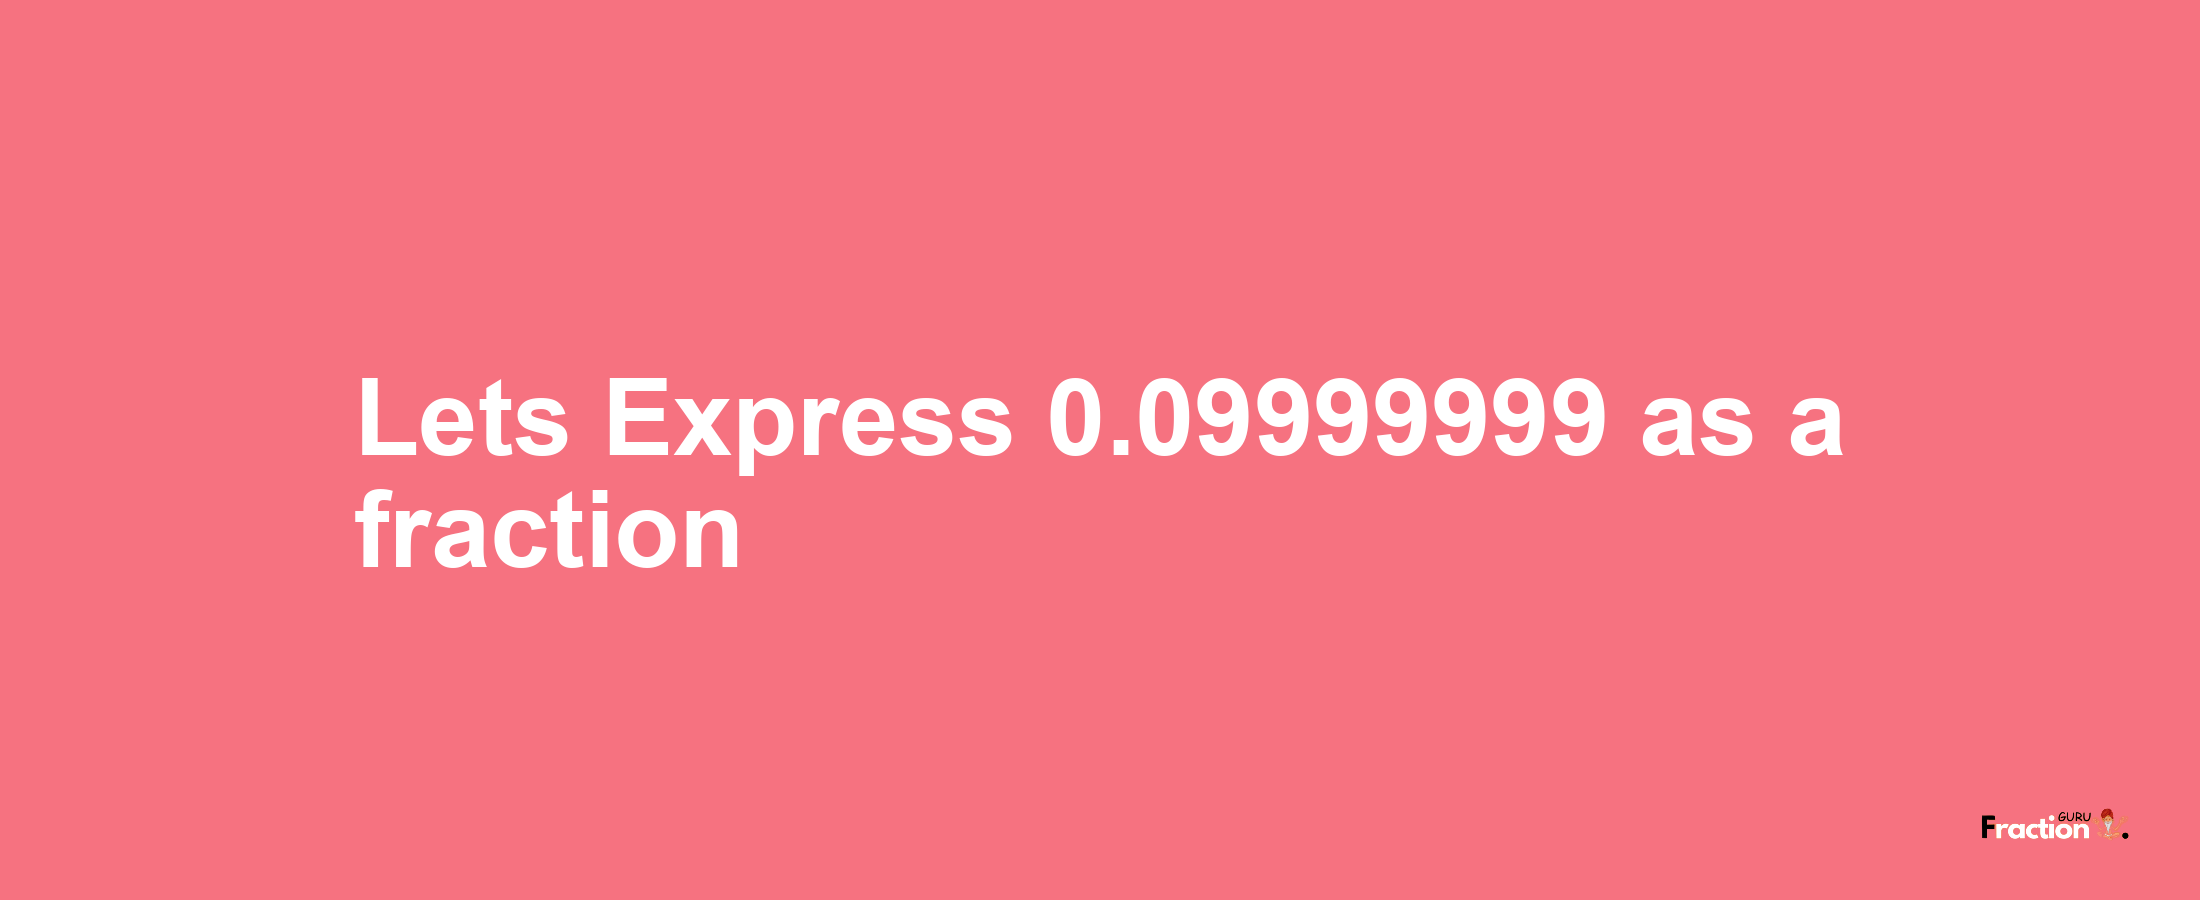 Lets Express 0.09999999 as afraction